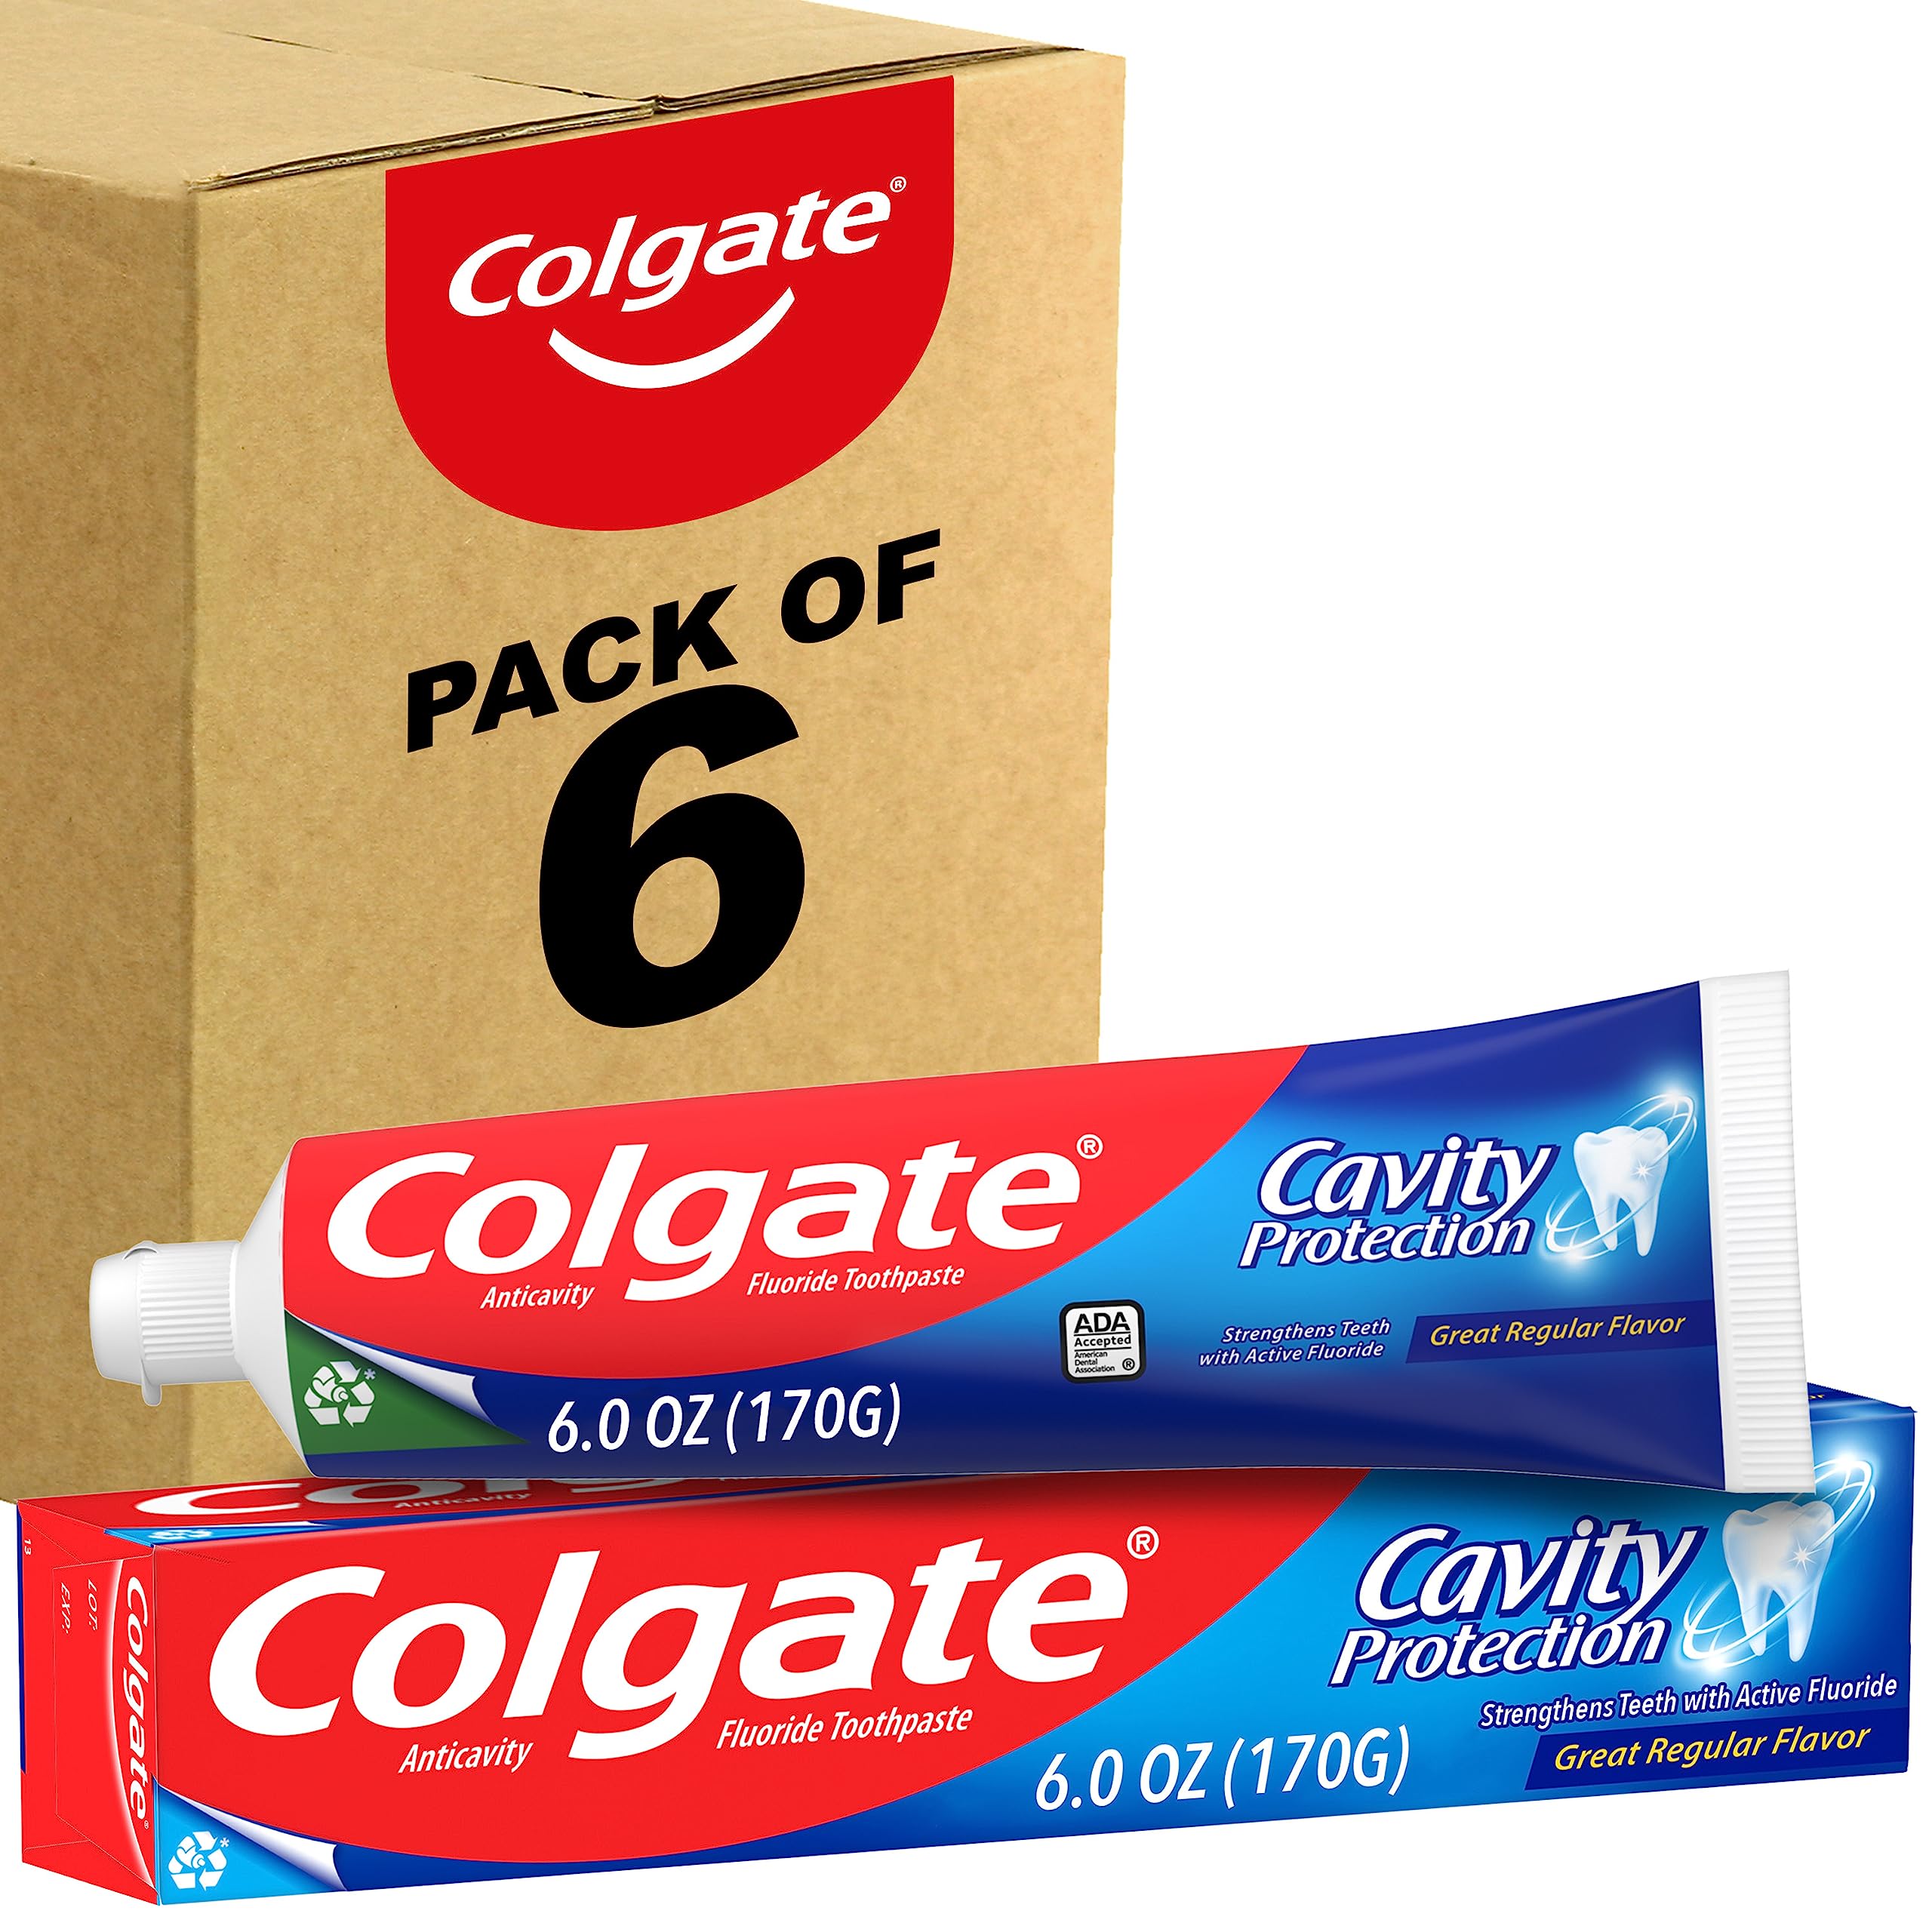 Colgate Cavity Protection Toothpaste with Fluoride, Great Regular Flavor, 6 Ounce (Pack of 6) x 5 - $29.70 at Amazon